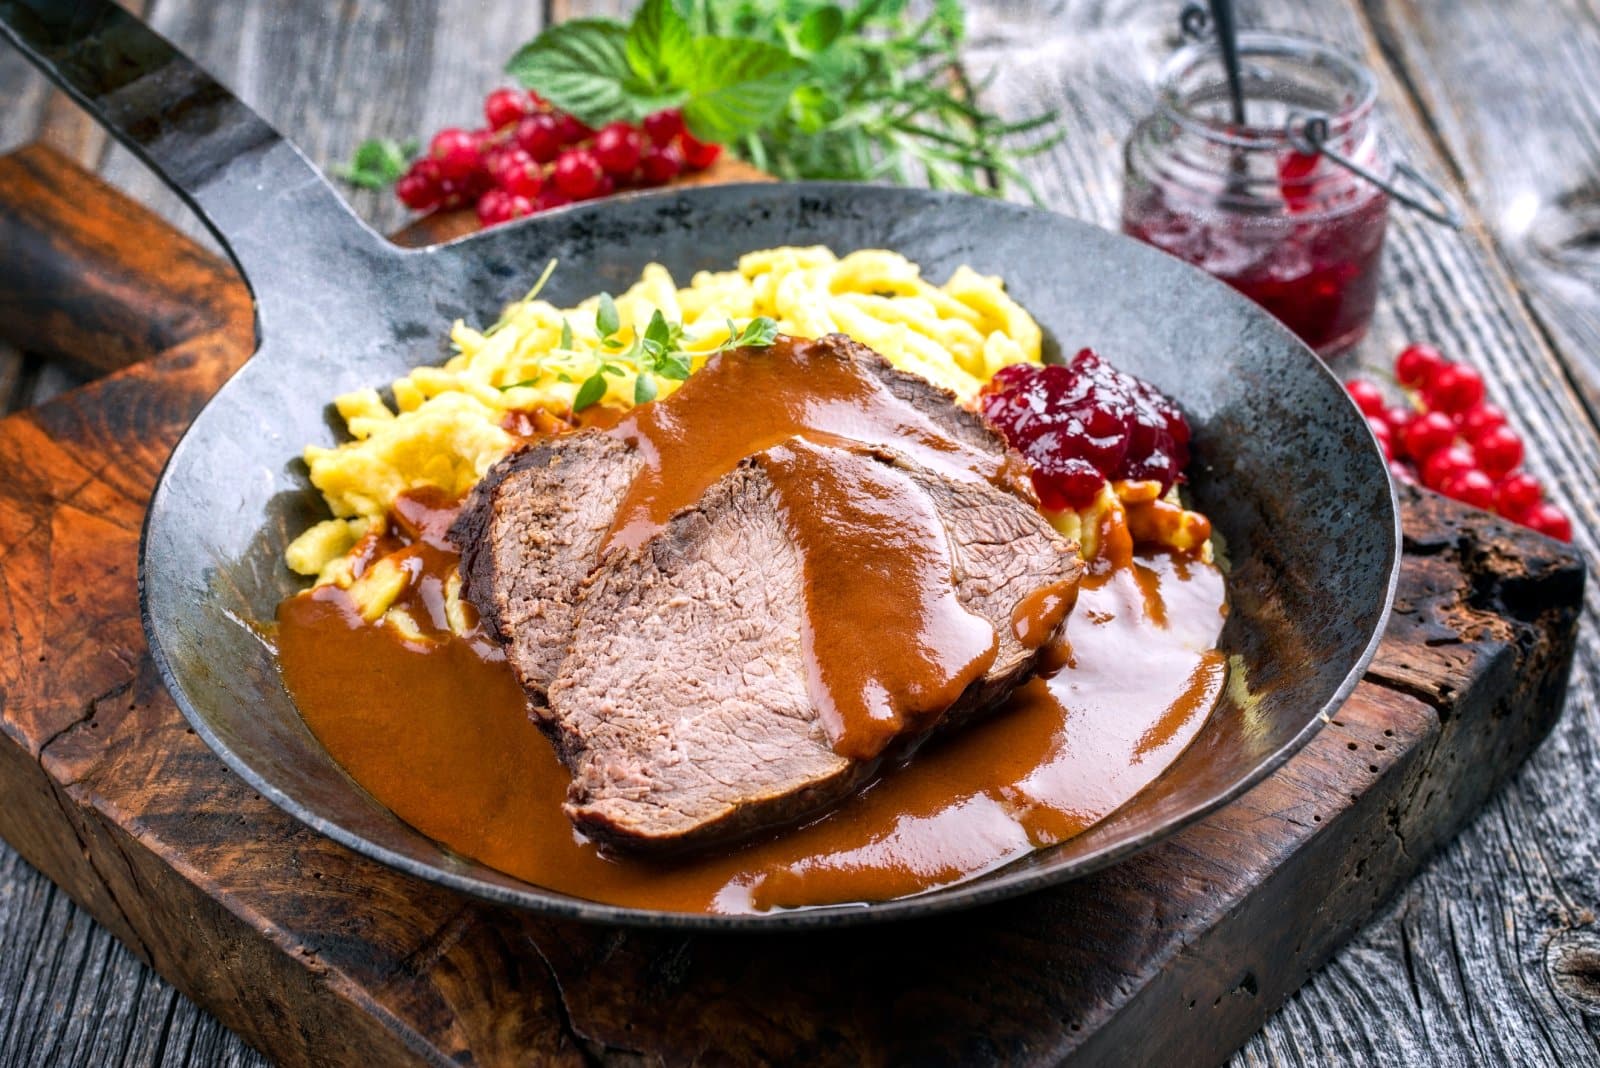 Image Credit: Shutterstock / hlphoto <p>A pot roast, usually of beef (but other meats can be used), marinated before slow</p> <p>cooking in a mixture of vinegar, water, and a variety of seasonings, Sauerbraten is a traditional German dish known for its tender meat and rich, flavorful sauce.</p>